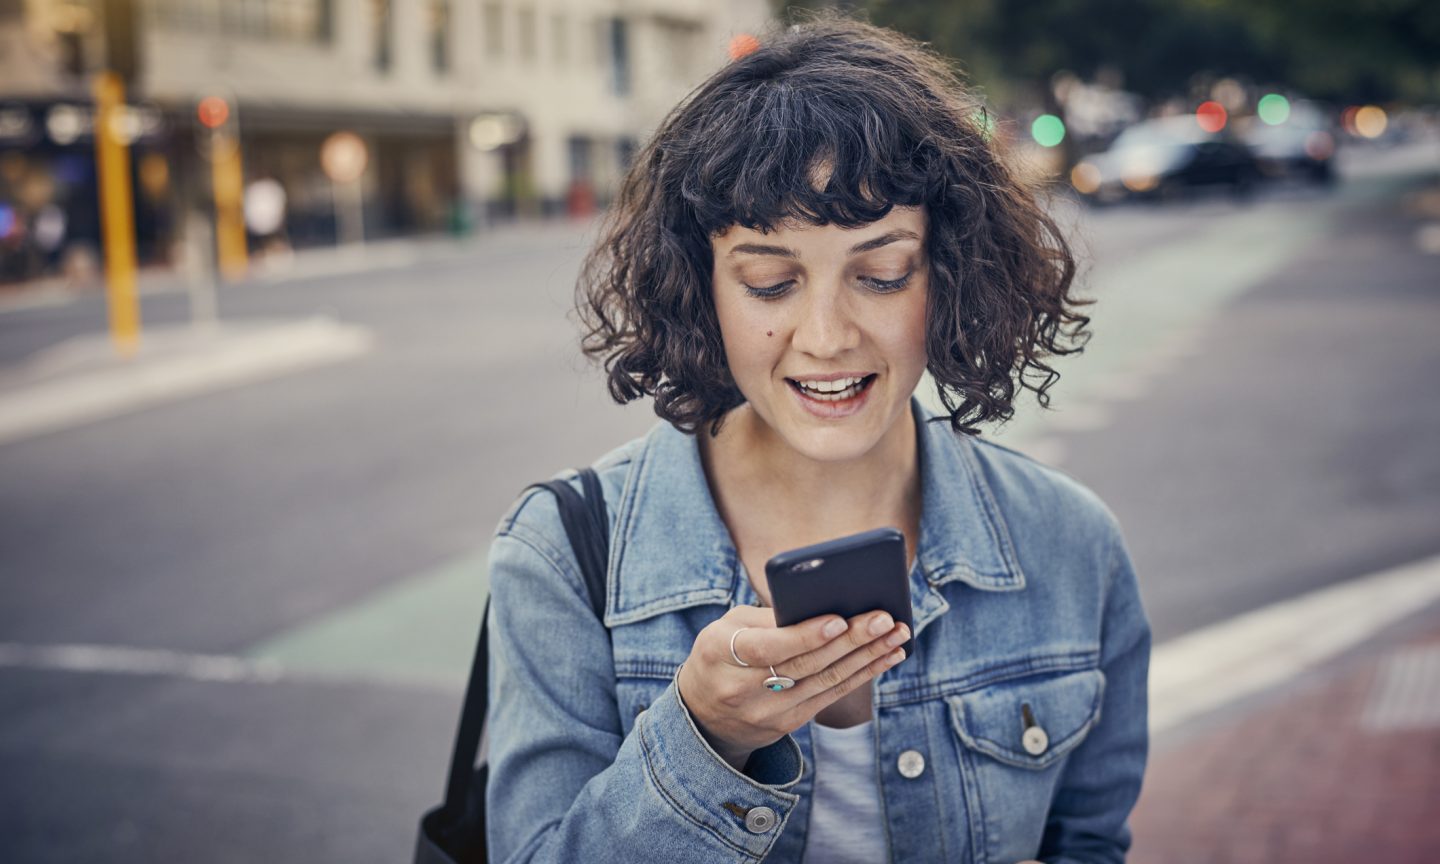 6 Cash Advance Apps That Cover You Till Payday - NerdWallet